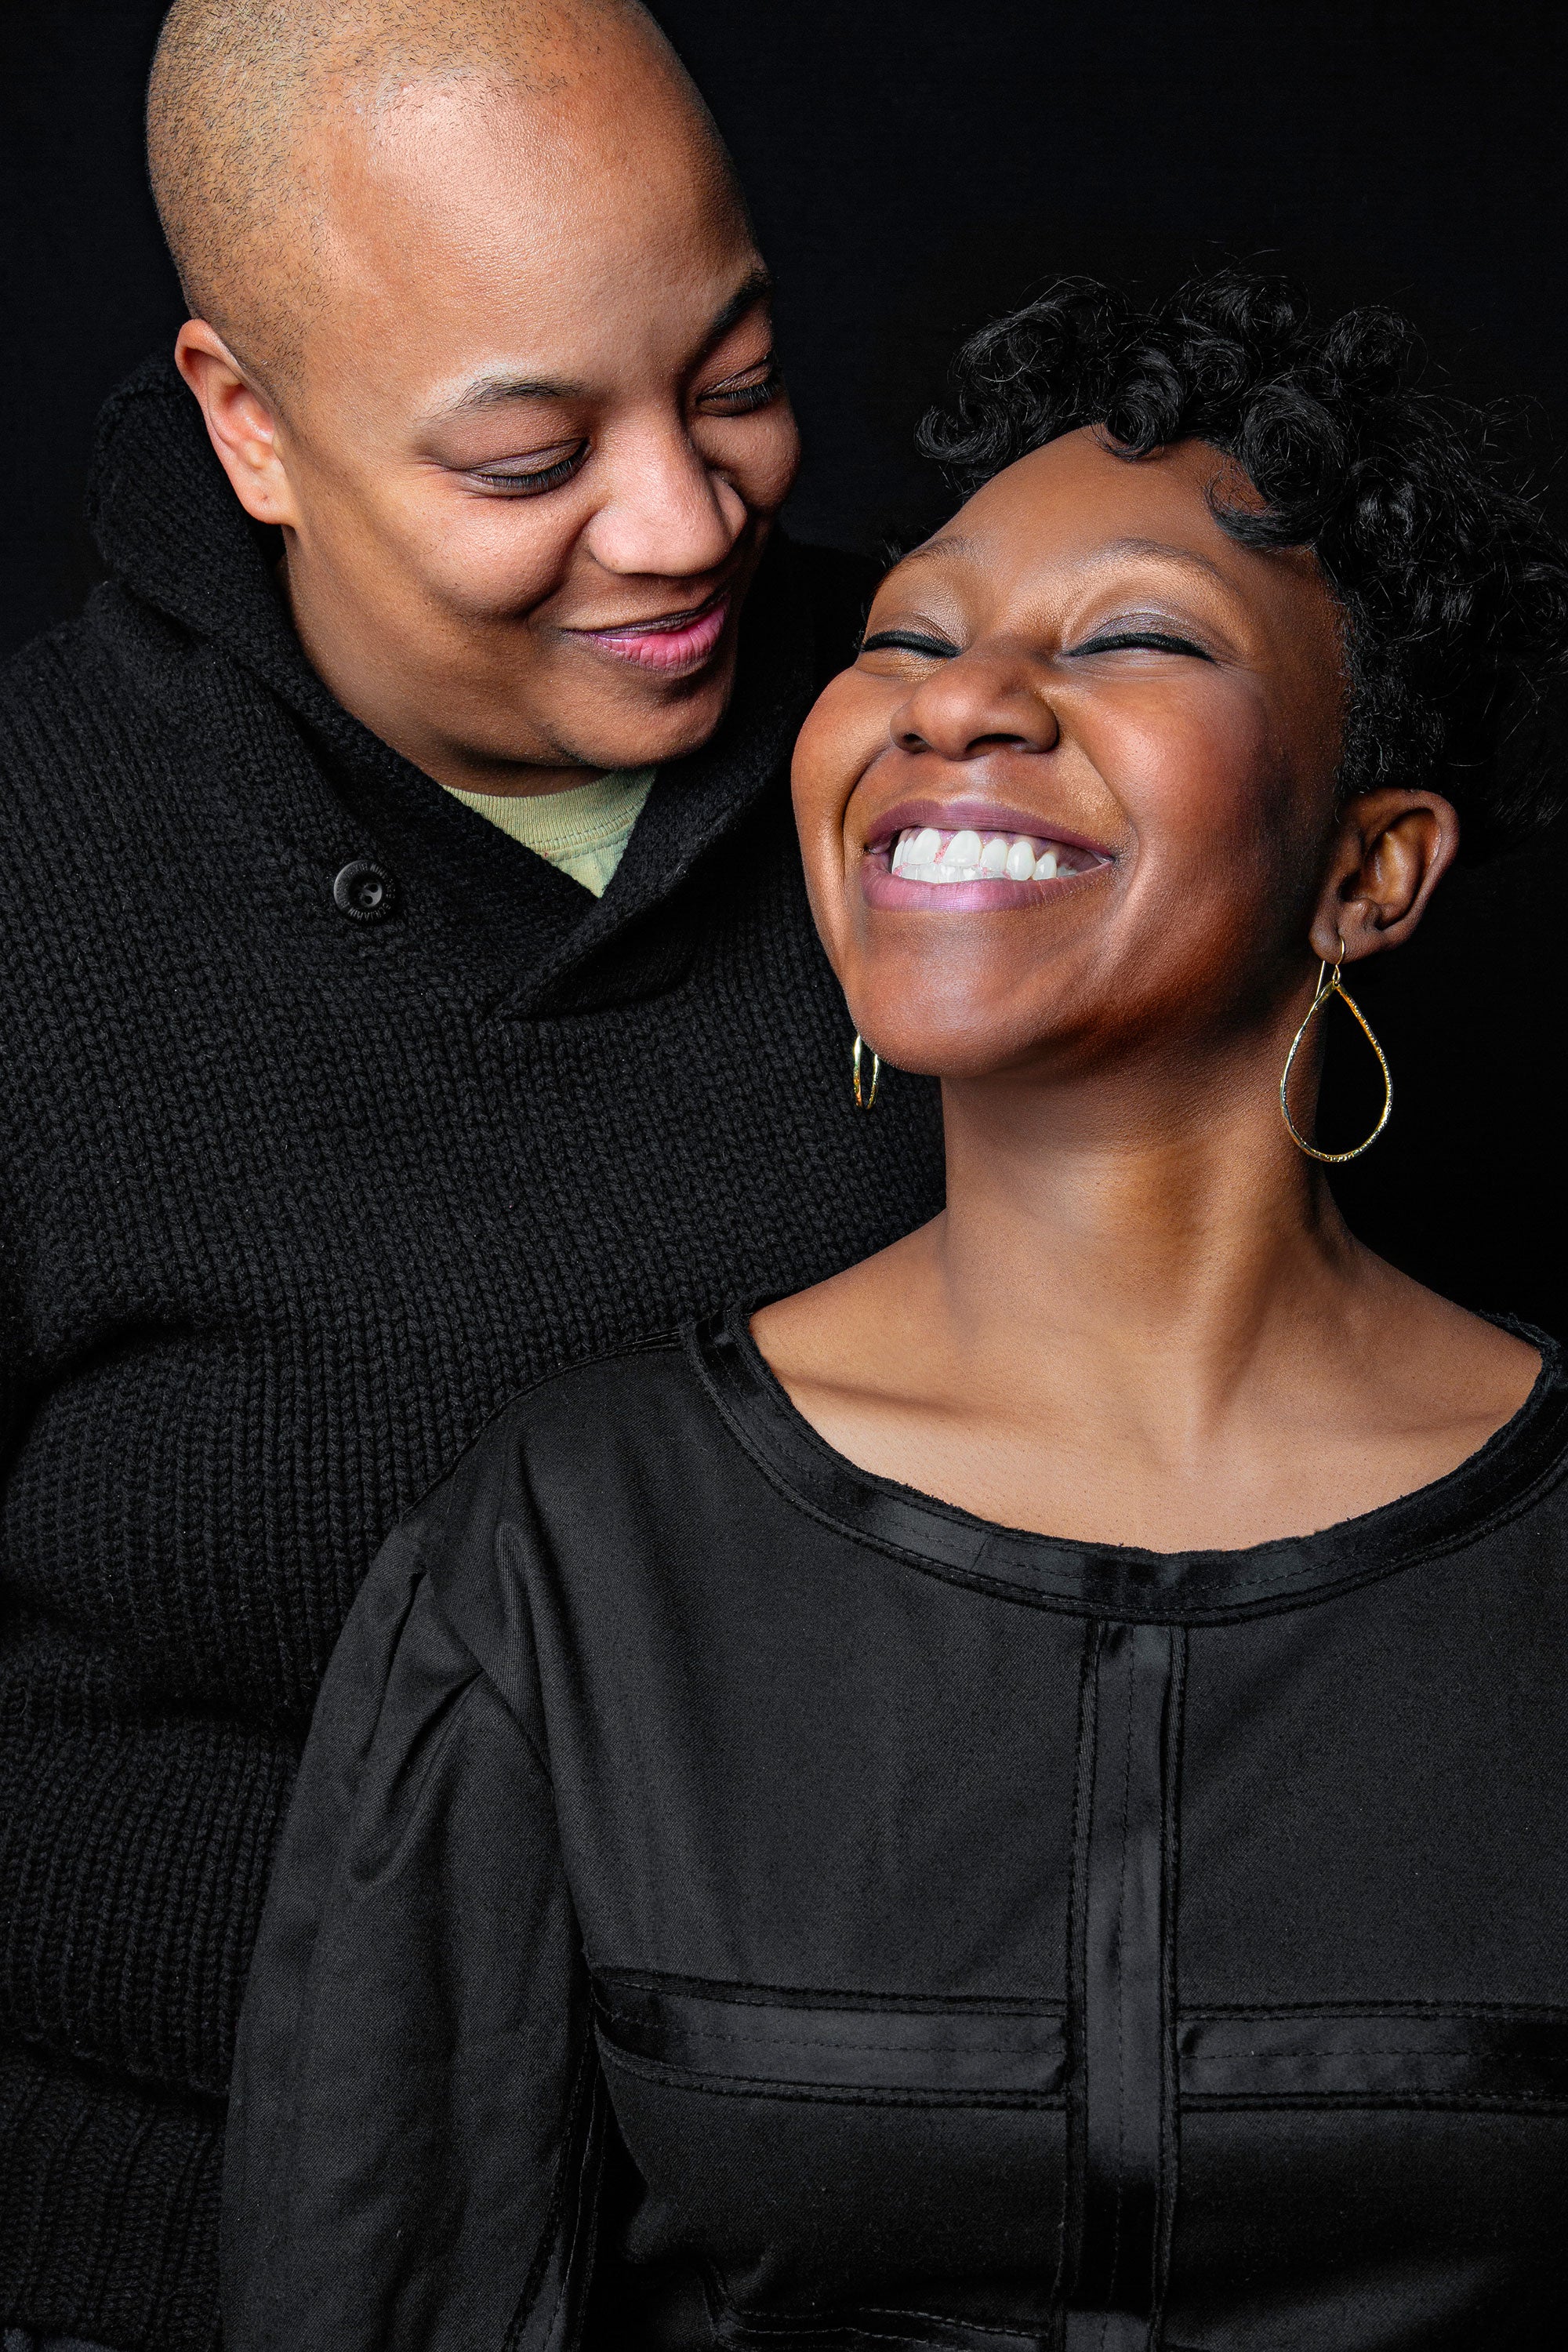 3 LGBTQ Couples Reflect On Being Liberated And Loved
